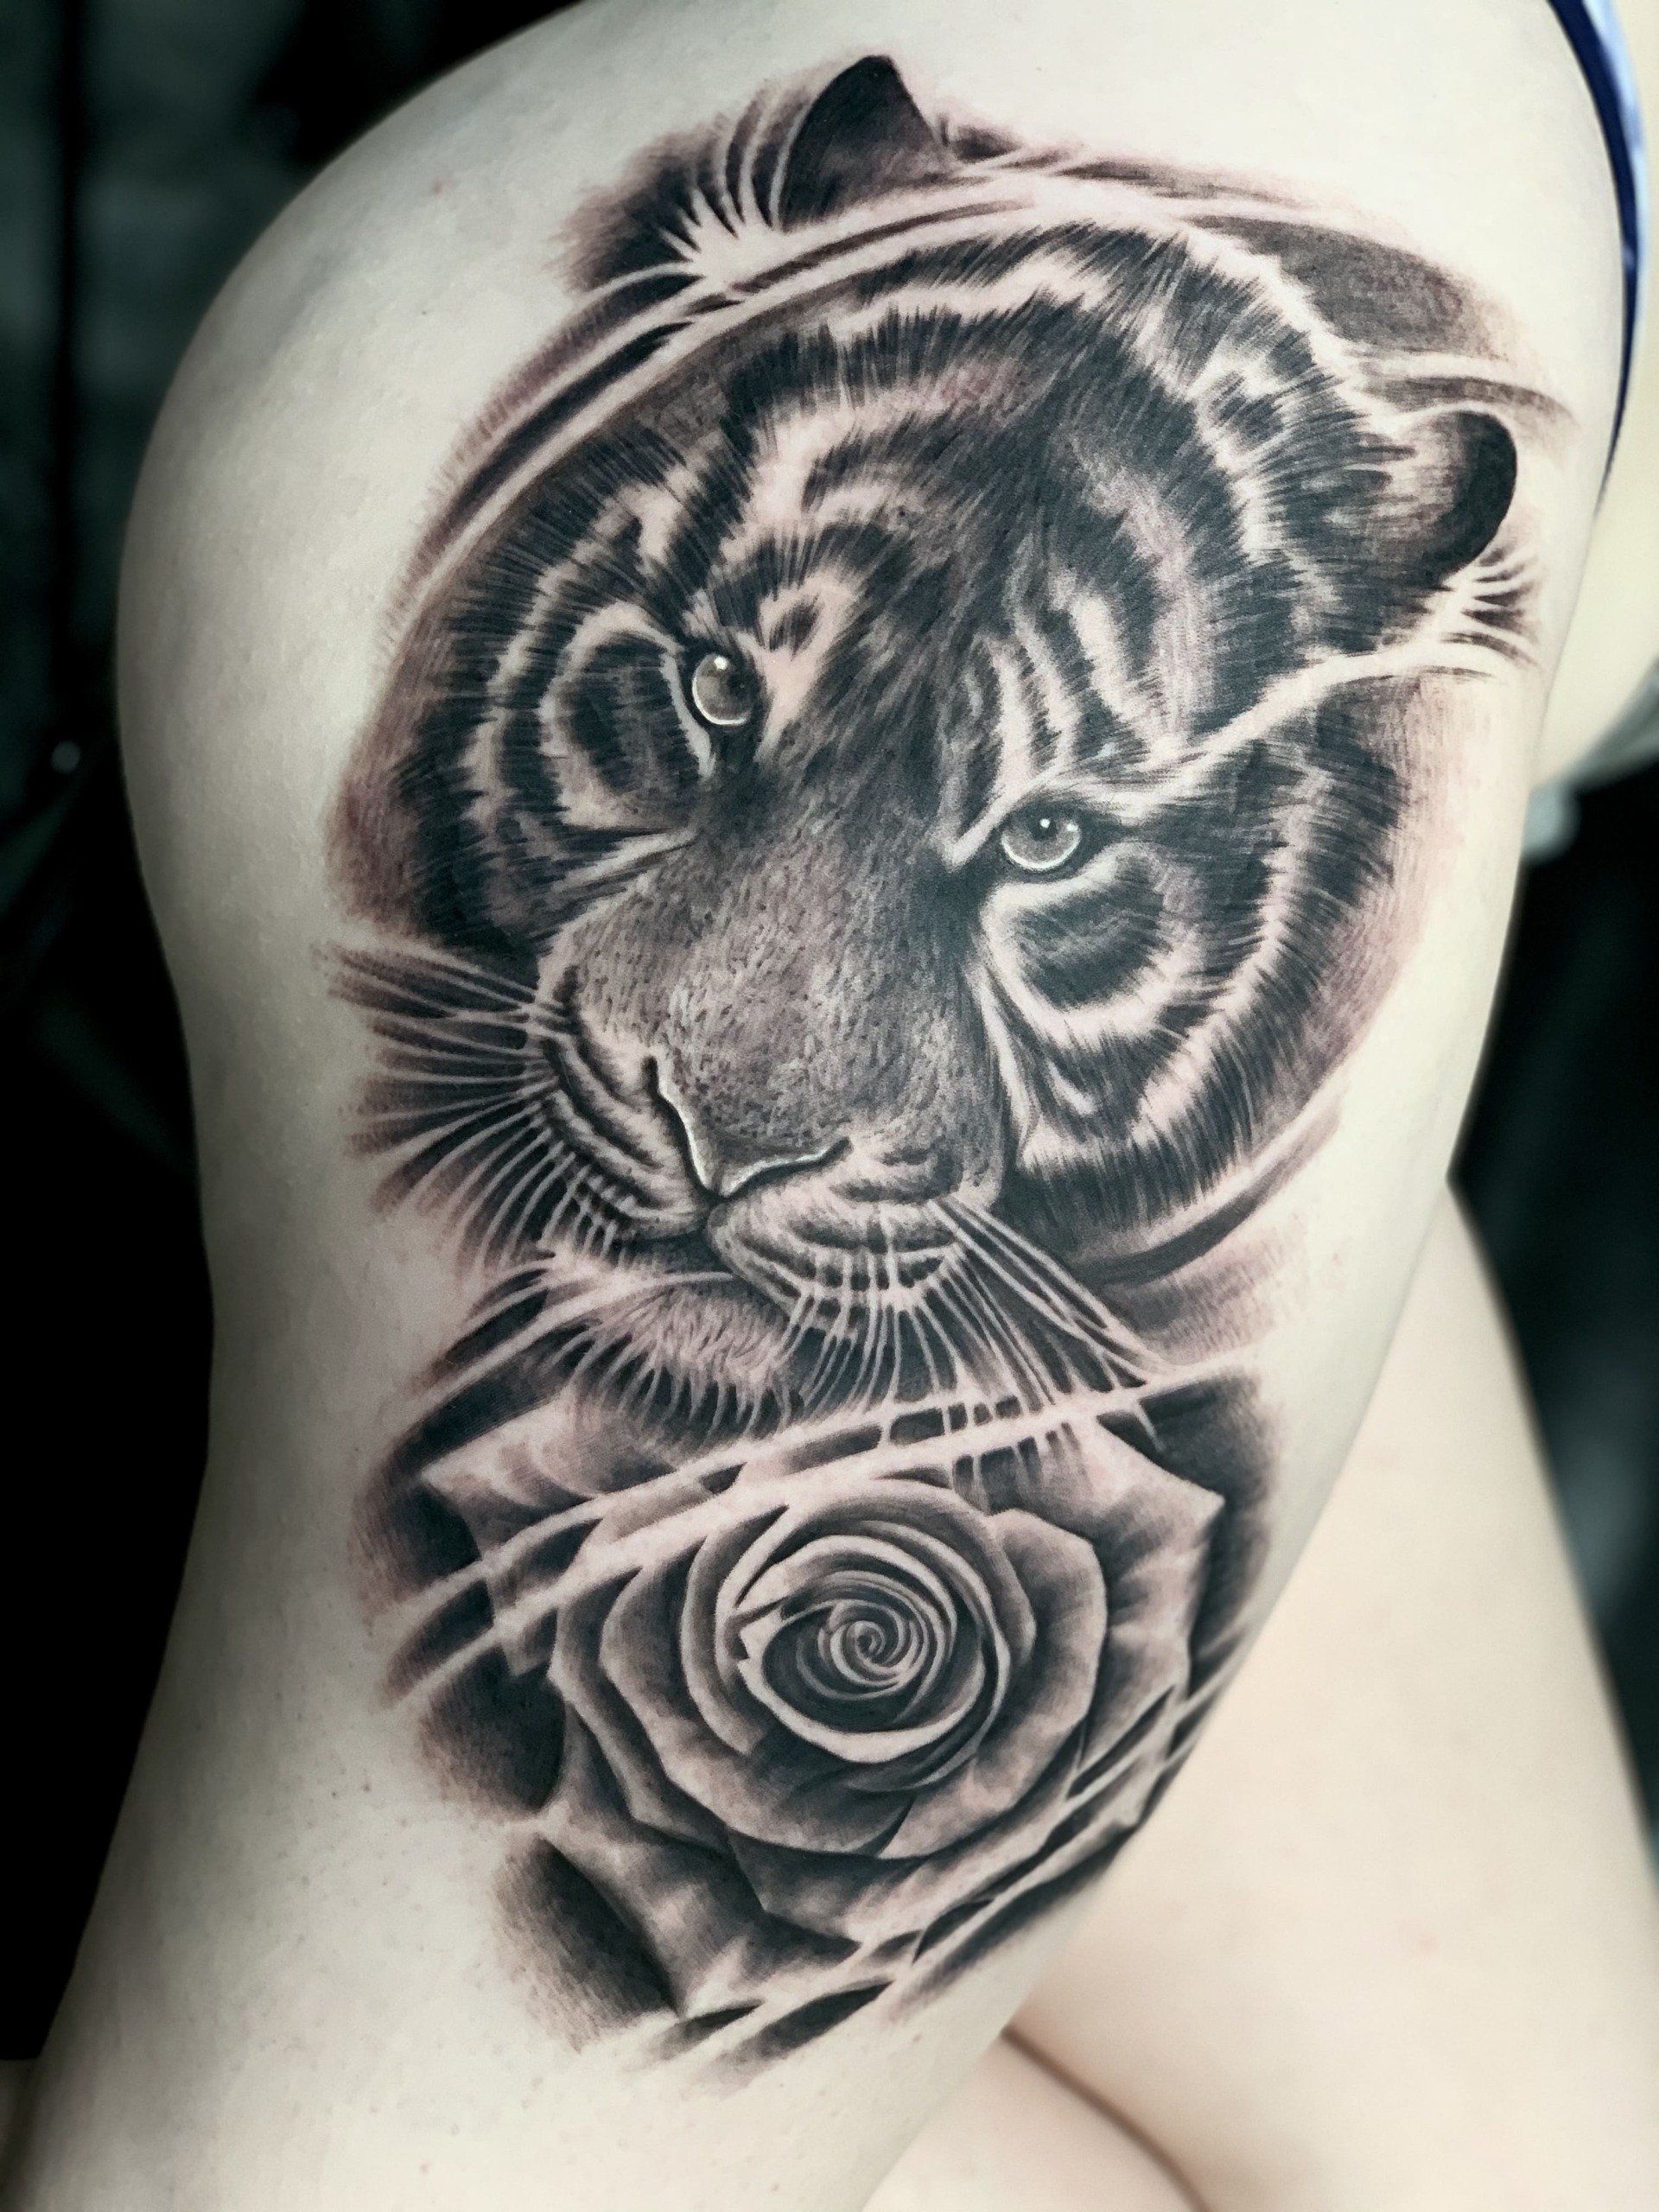 Cover Up Tattoo of Black and Grey Tiger over a Rose